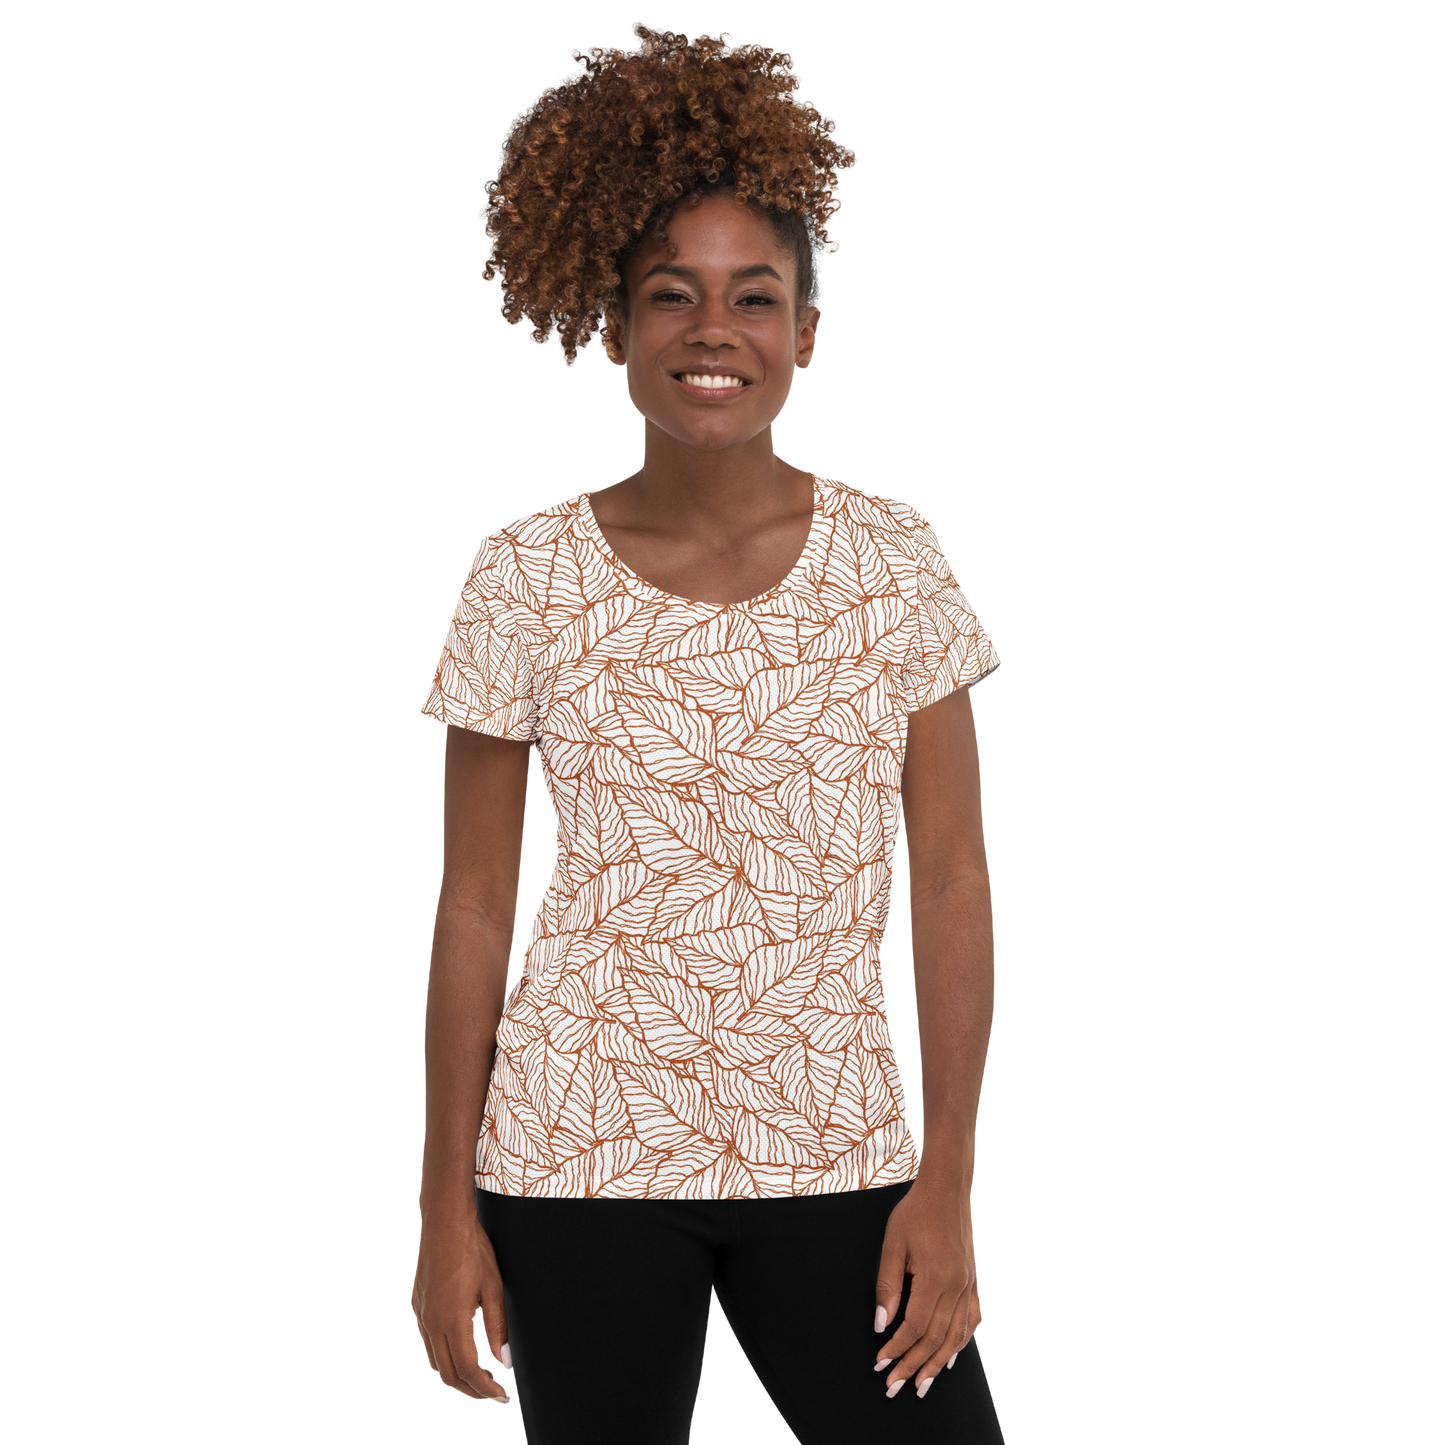 Colorful Fall Leaves | Seamless Patterns | All-Over Print Women's Athletic T-Shirt - #1